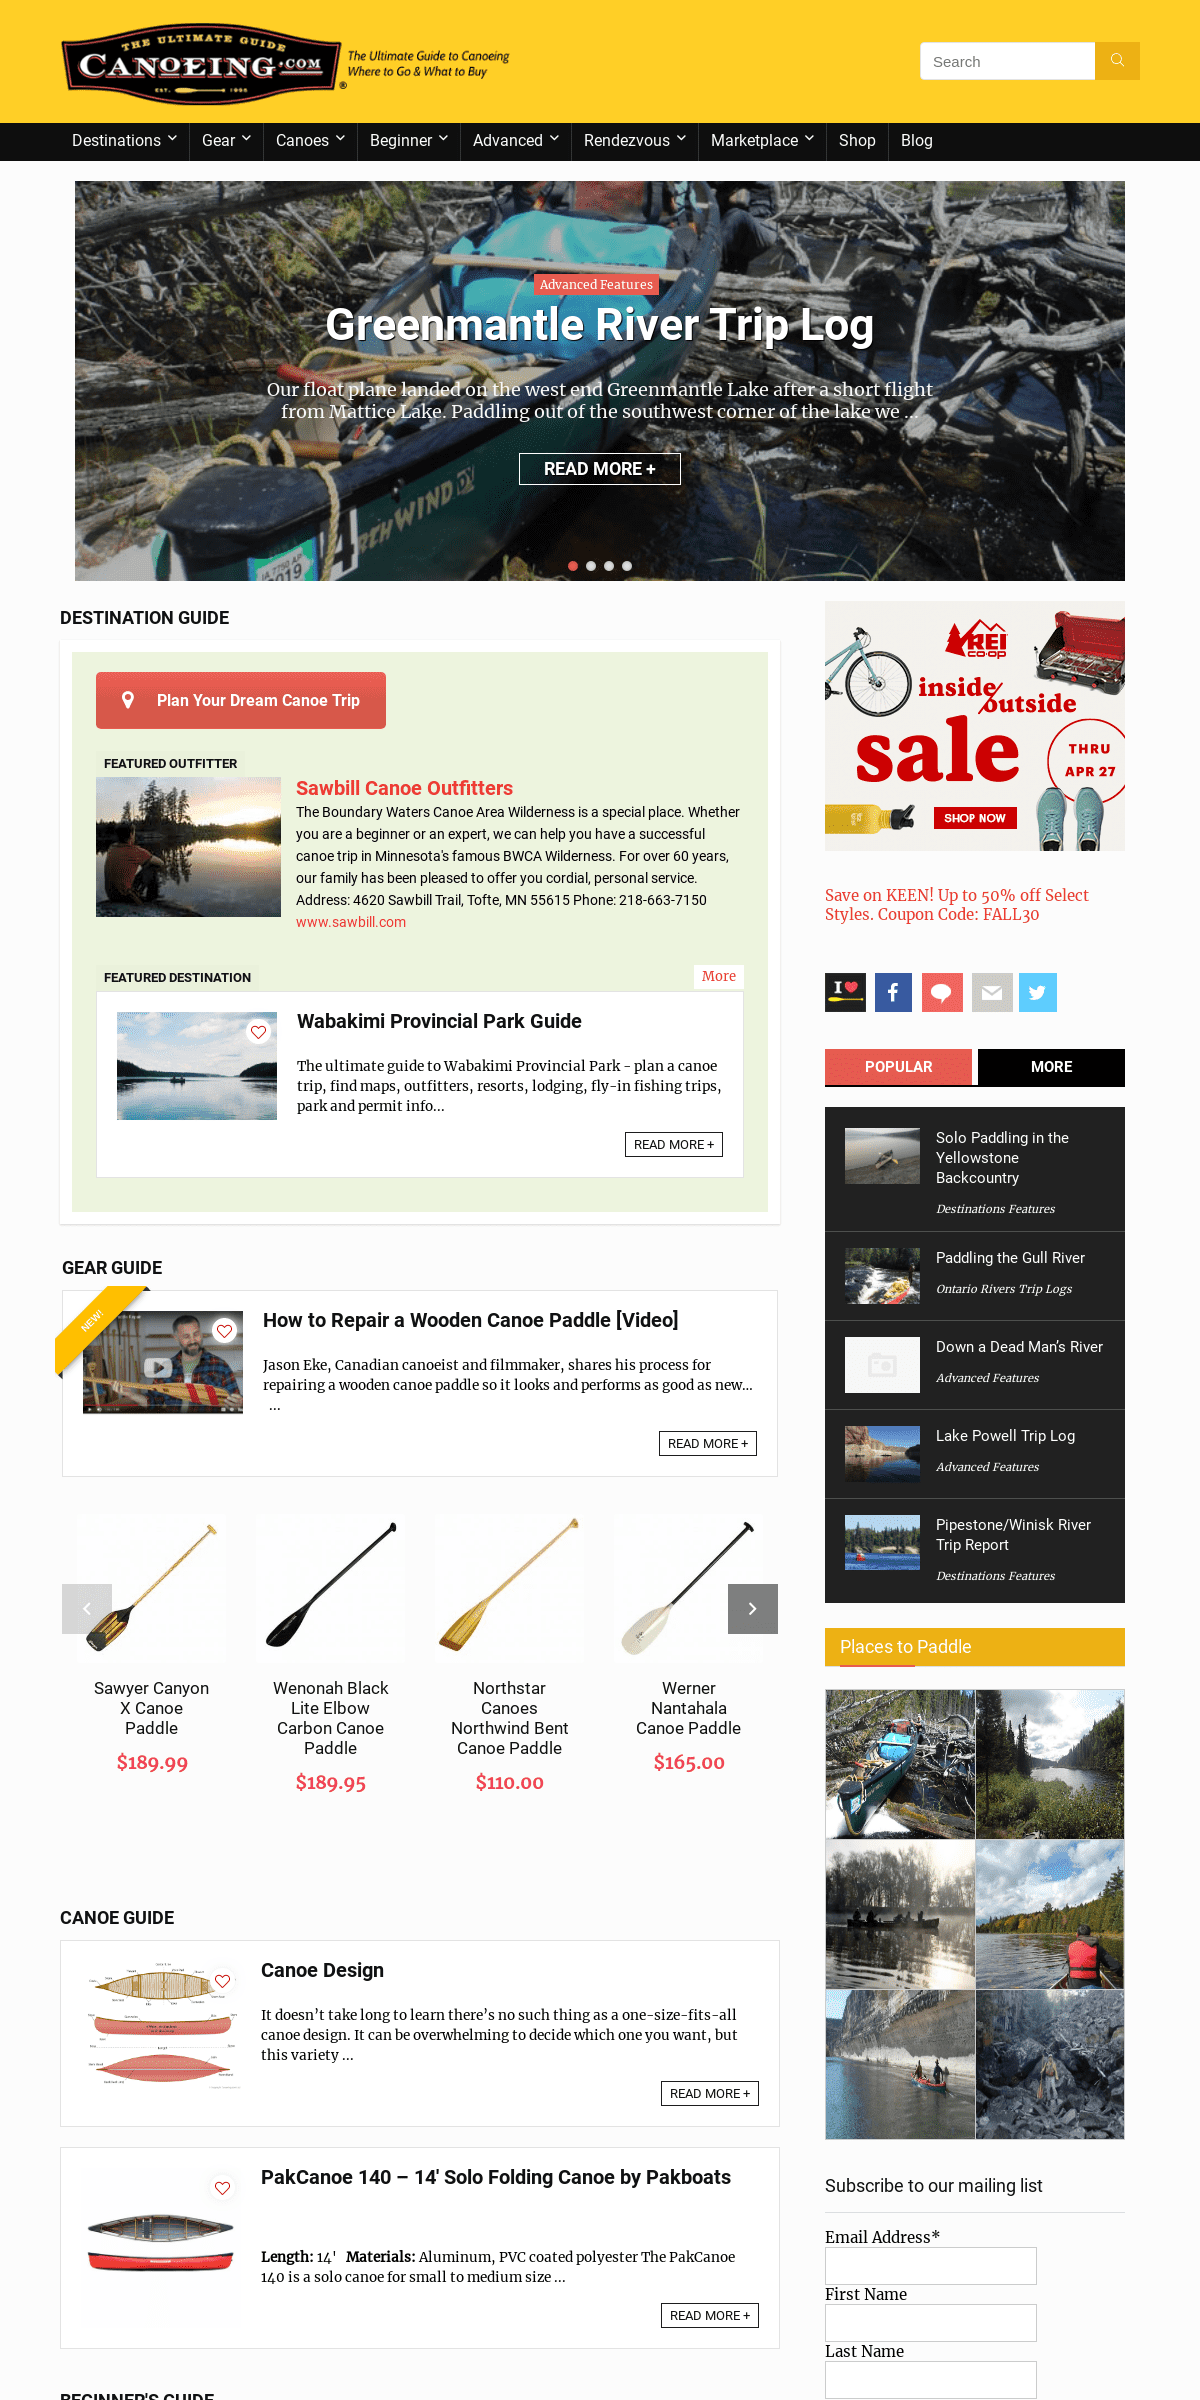 A complete backup of canoeing.com